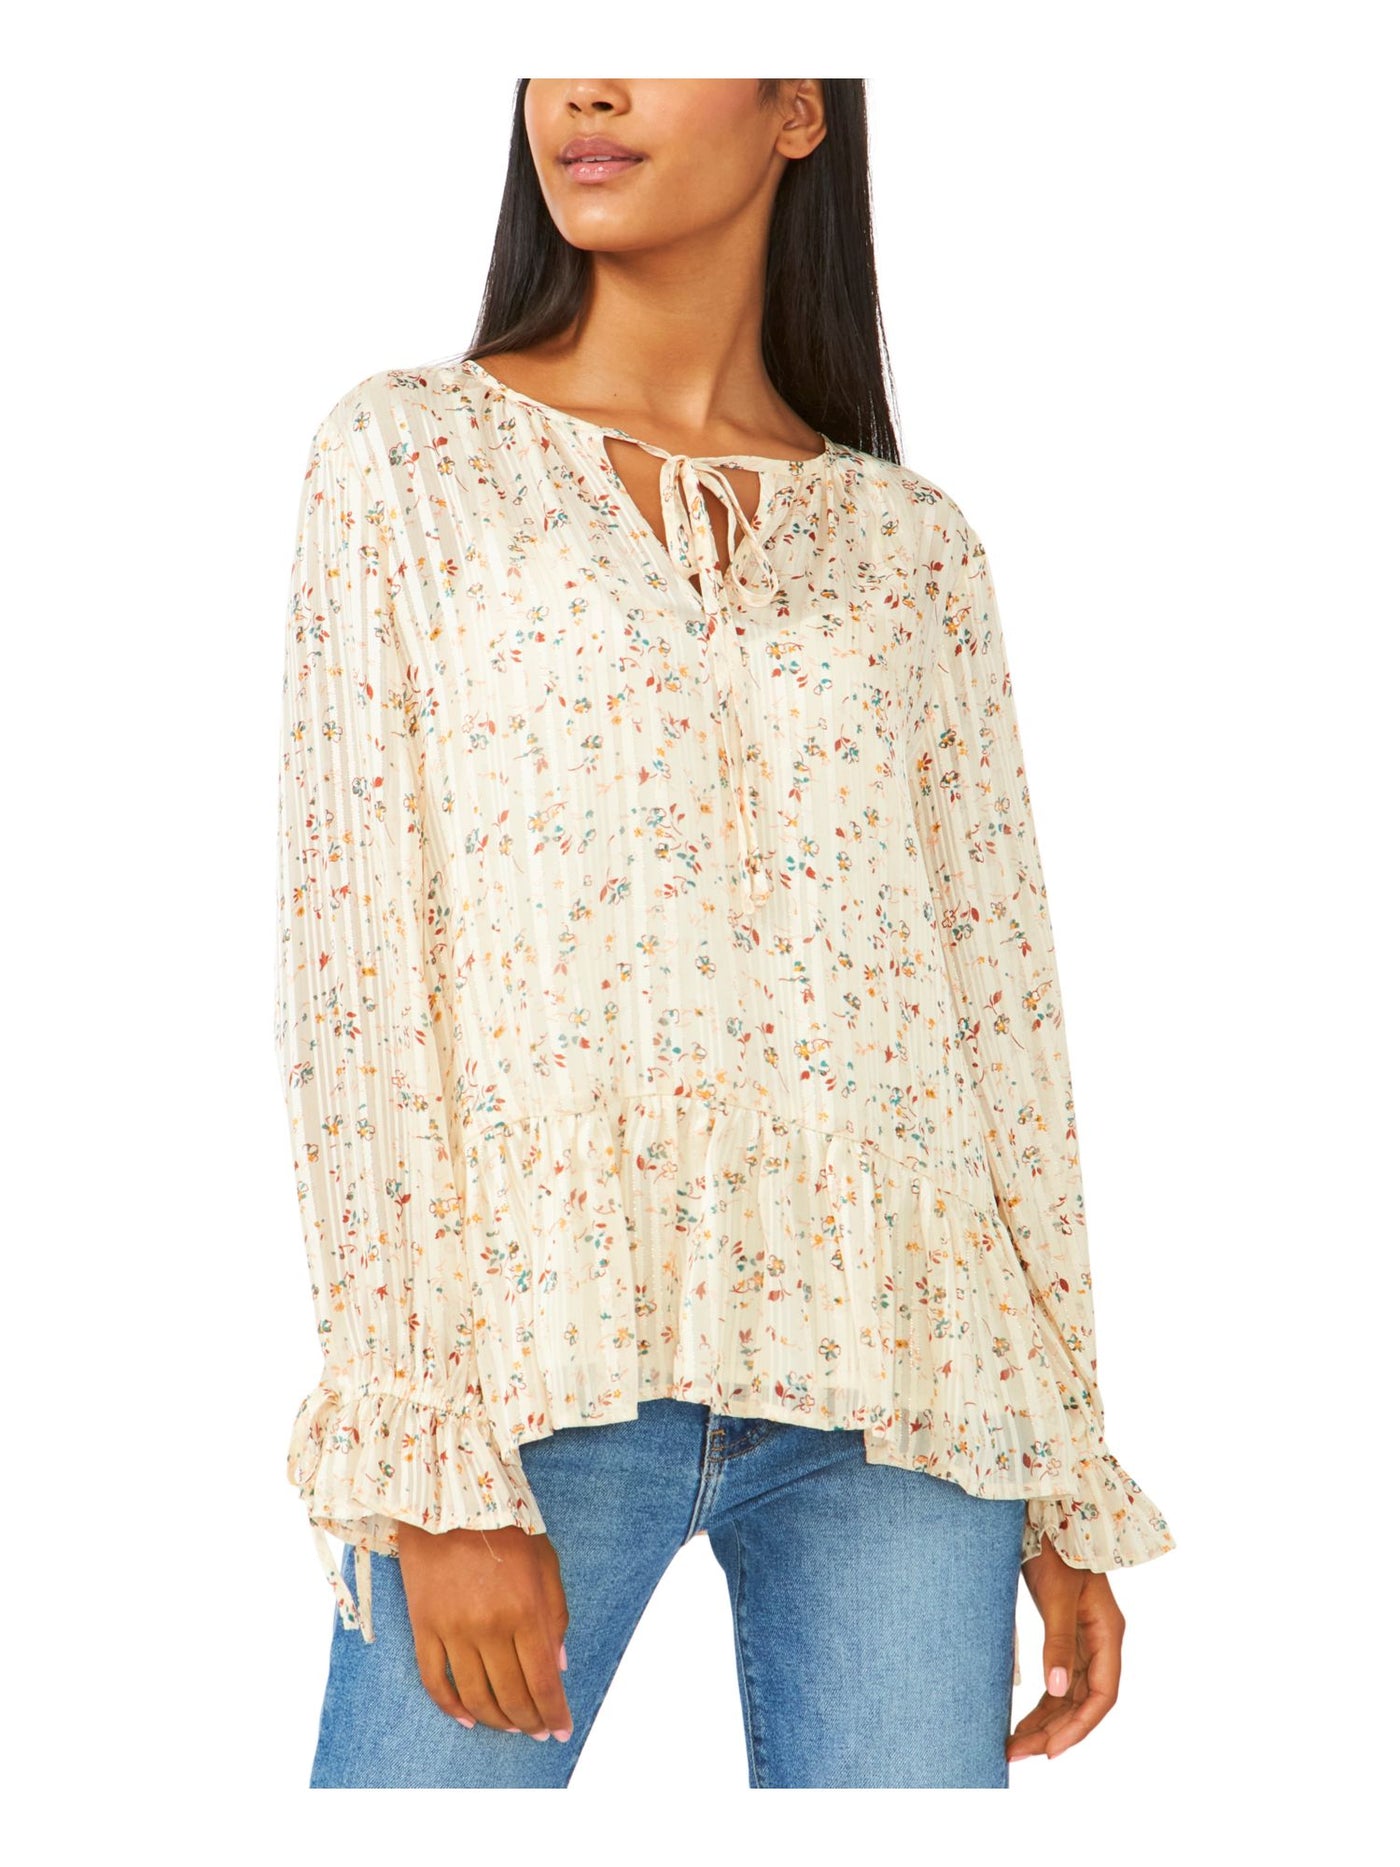 RILEY&RAE Womens Beige Tie Ruffled Keyhole Front Floral Long Sleeve Round Neck Top S